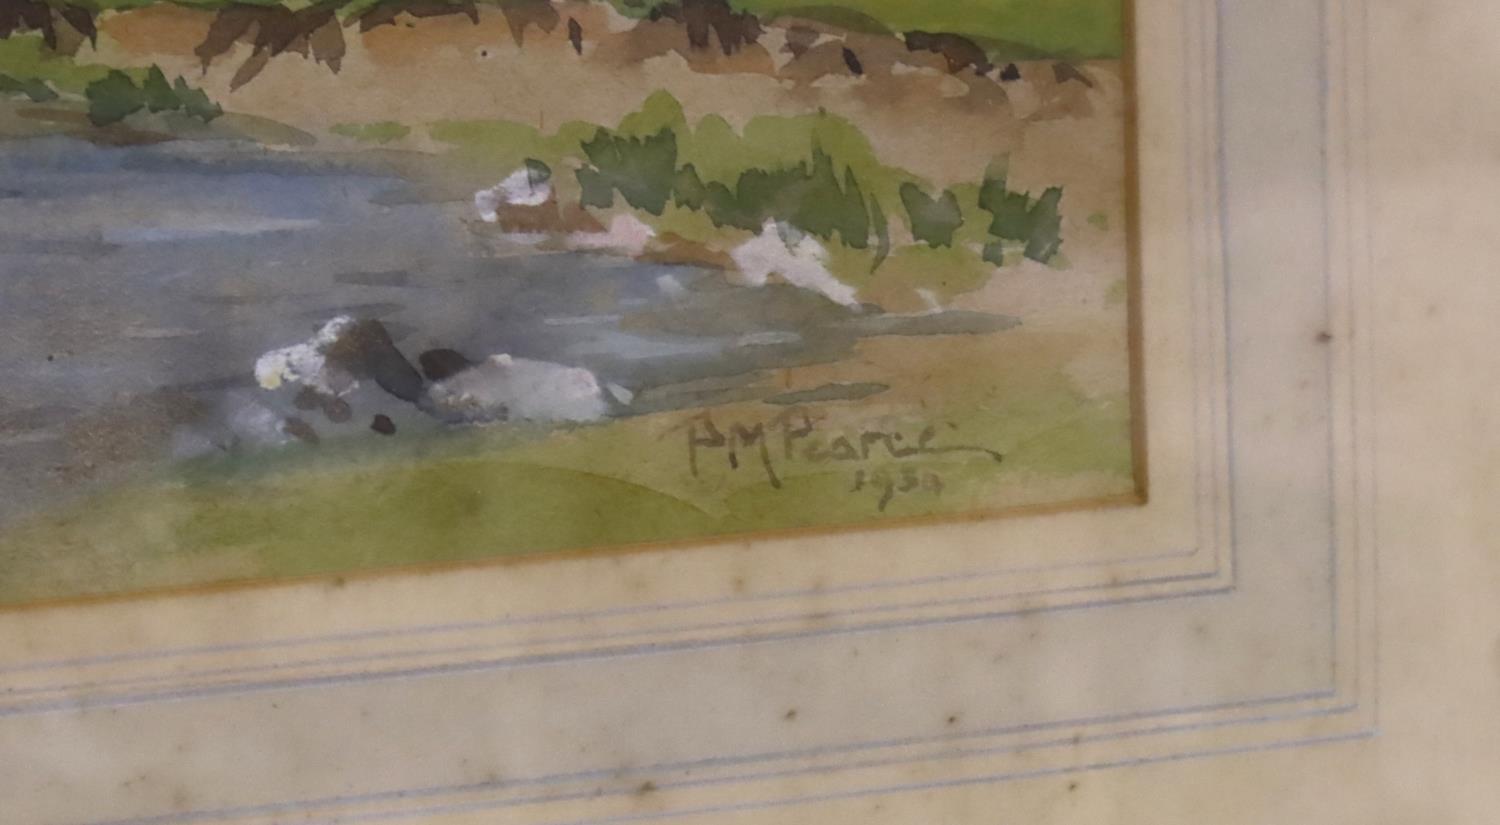 Two PM Pearce watercolours, both signed, one dated 1934, 38 x 28 cm. Not available for in-house P&P, - Image 5 of 5